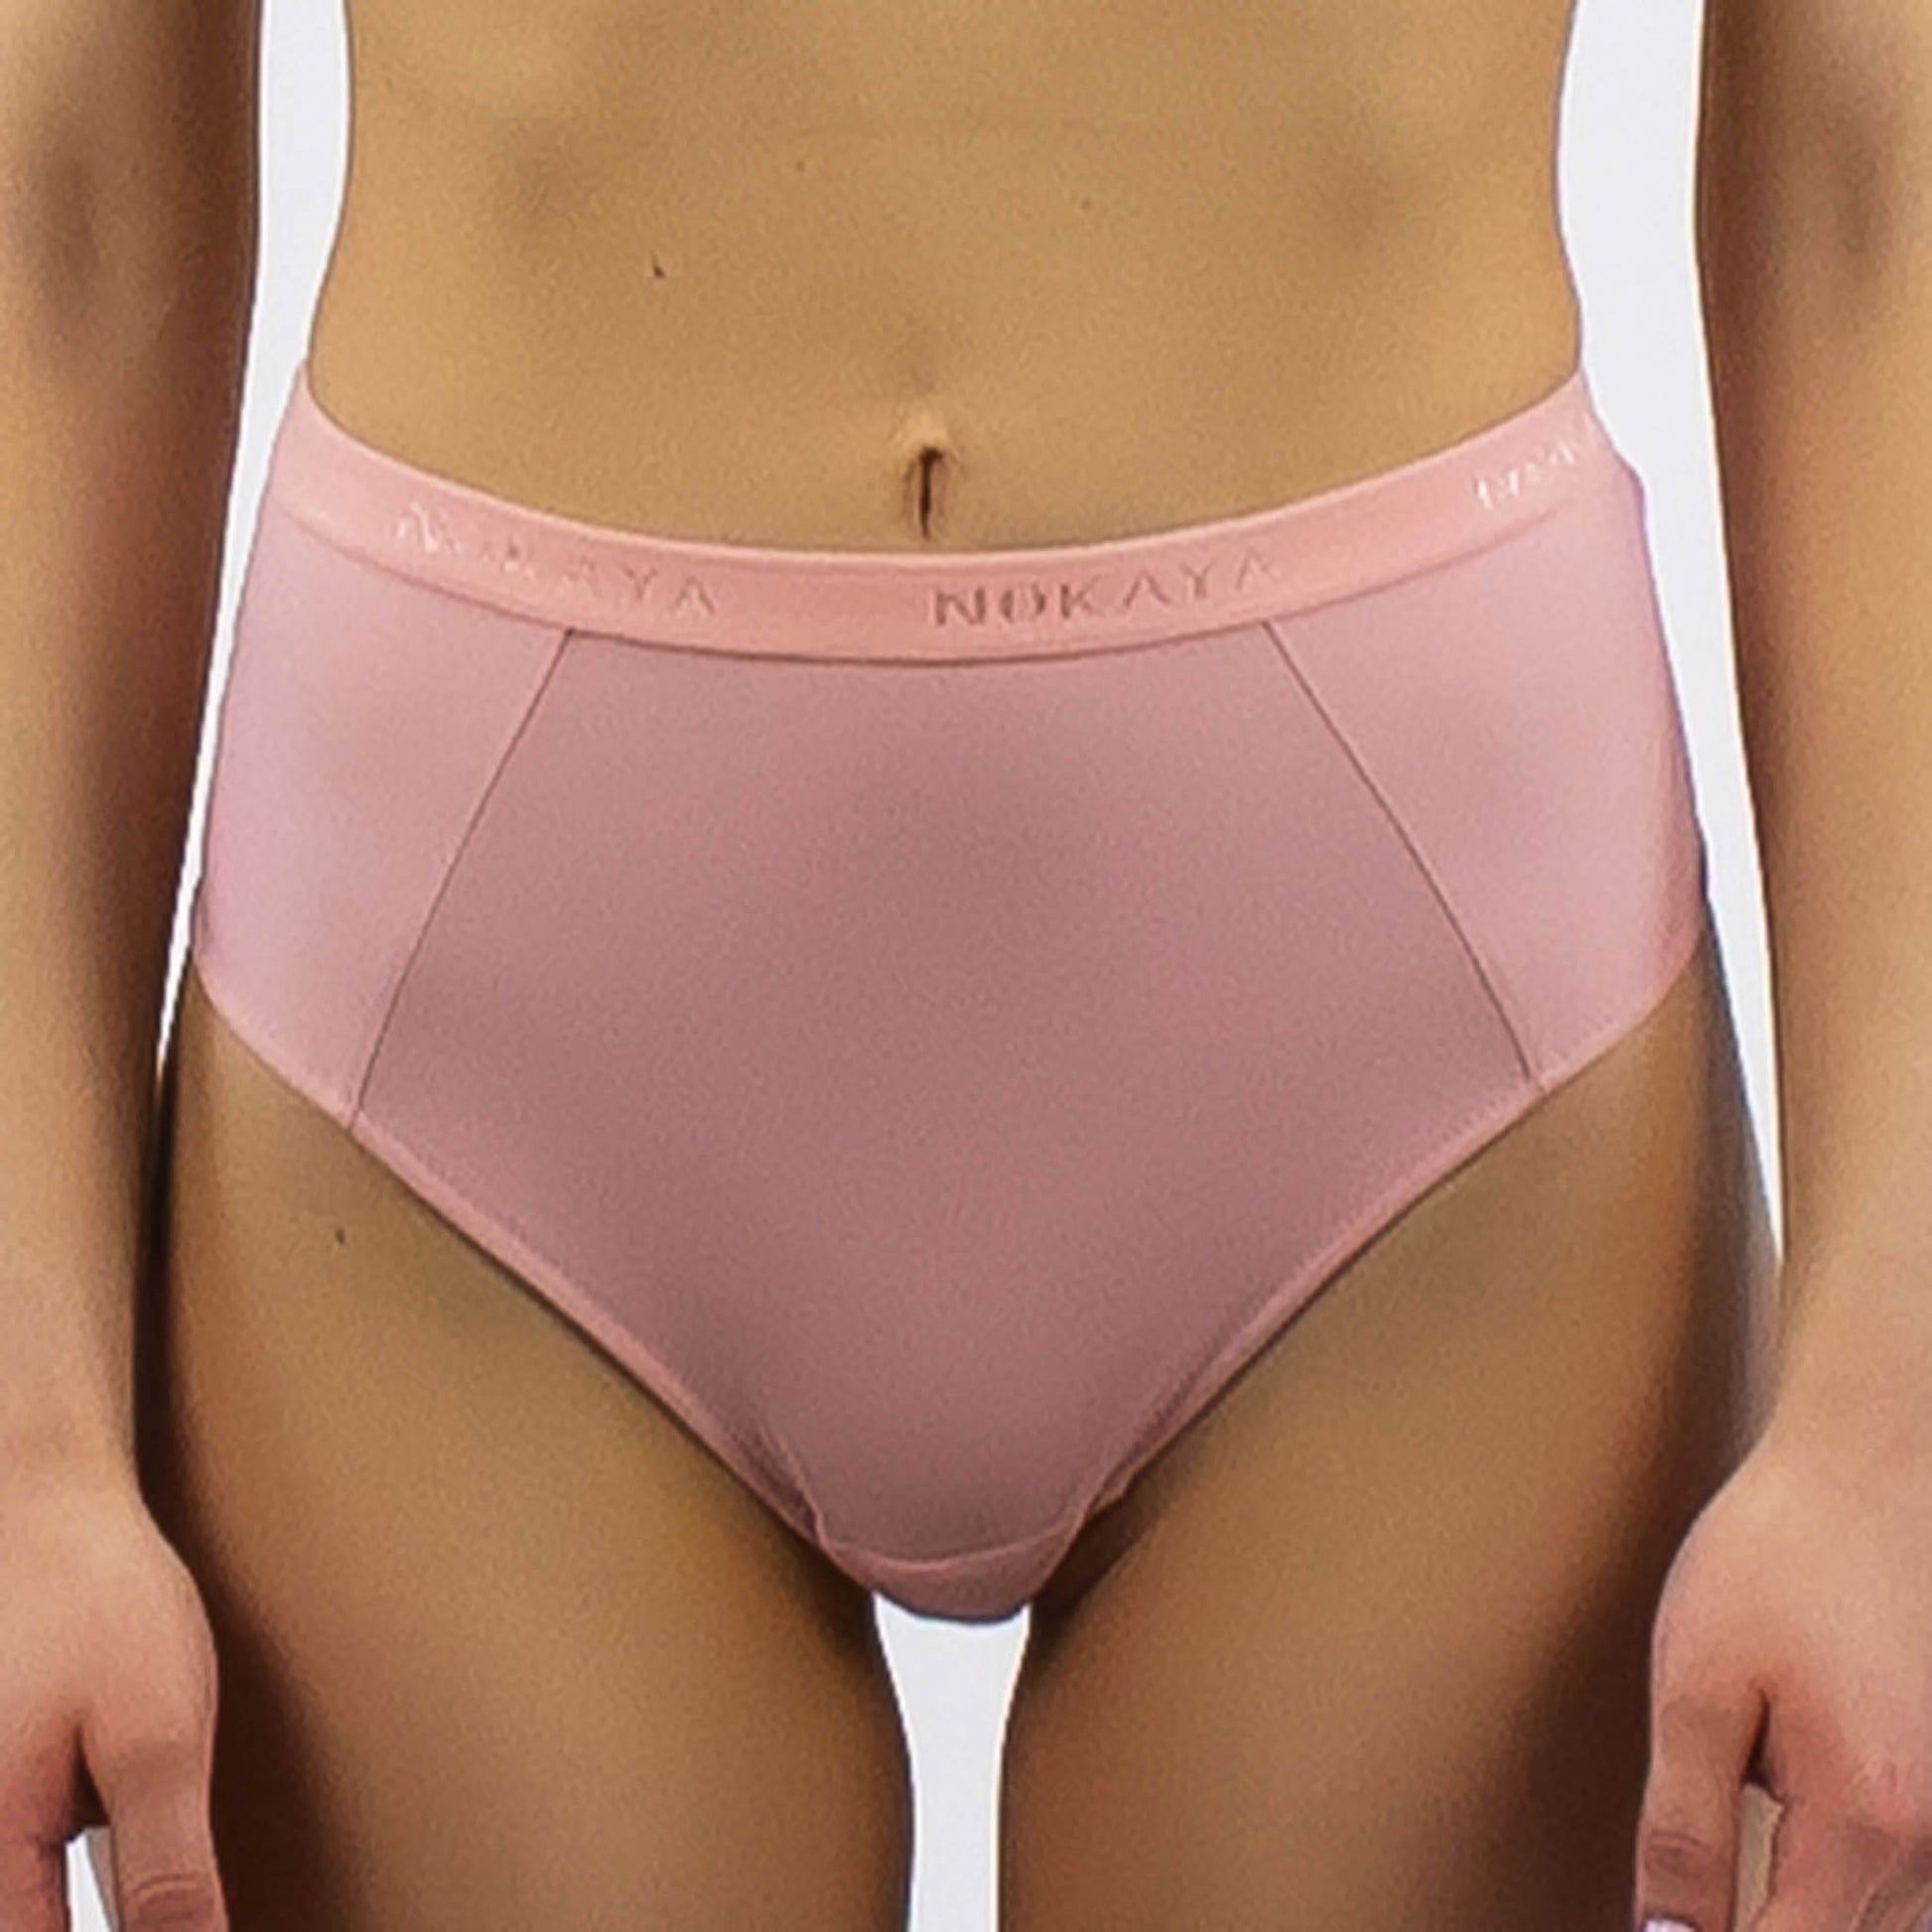 ULTRA high waist bikini is designed for a seamless finish, so they feel ultra-comfortable and won't be visible under clothing. Front close up look